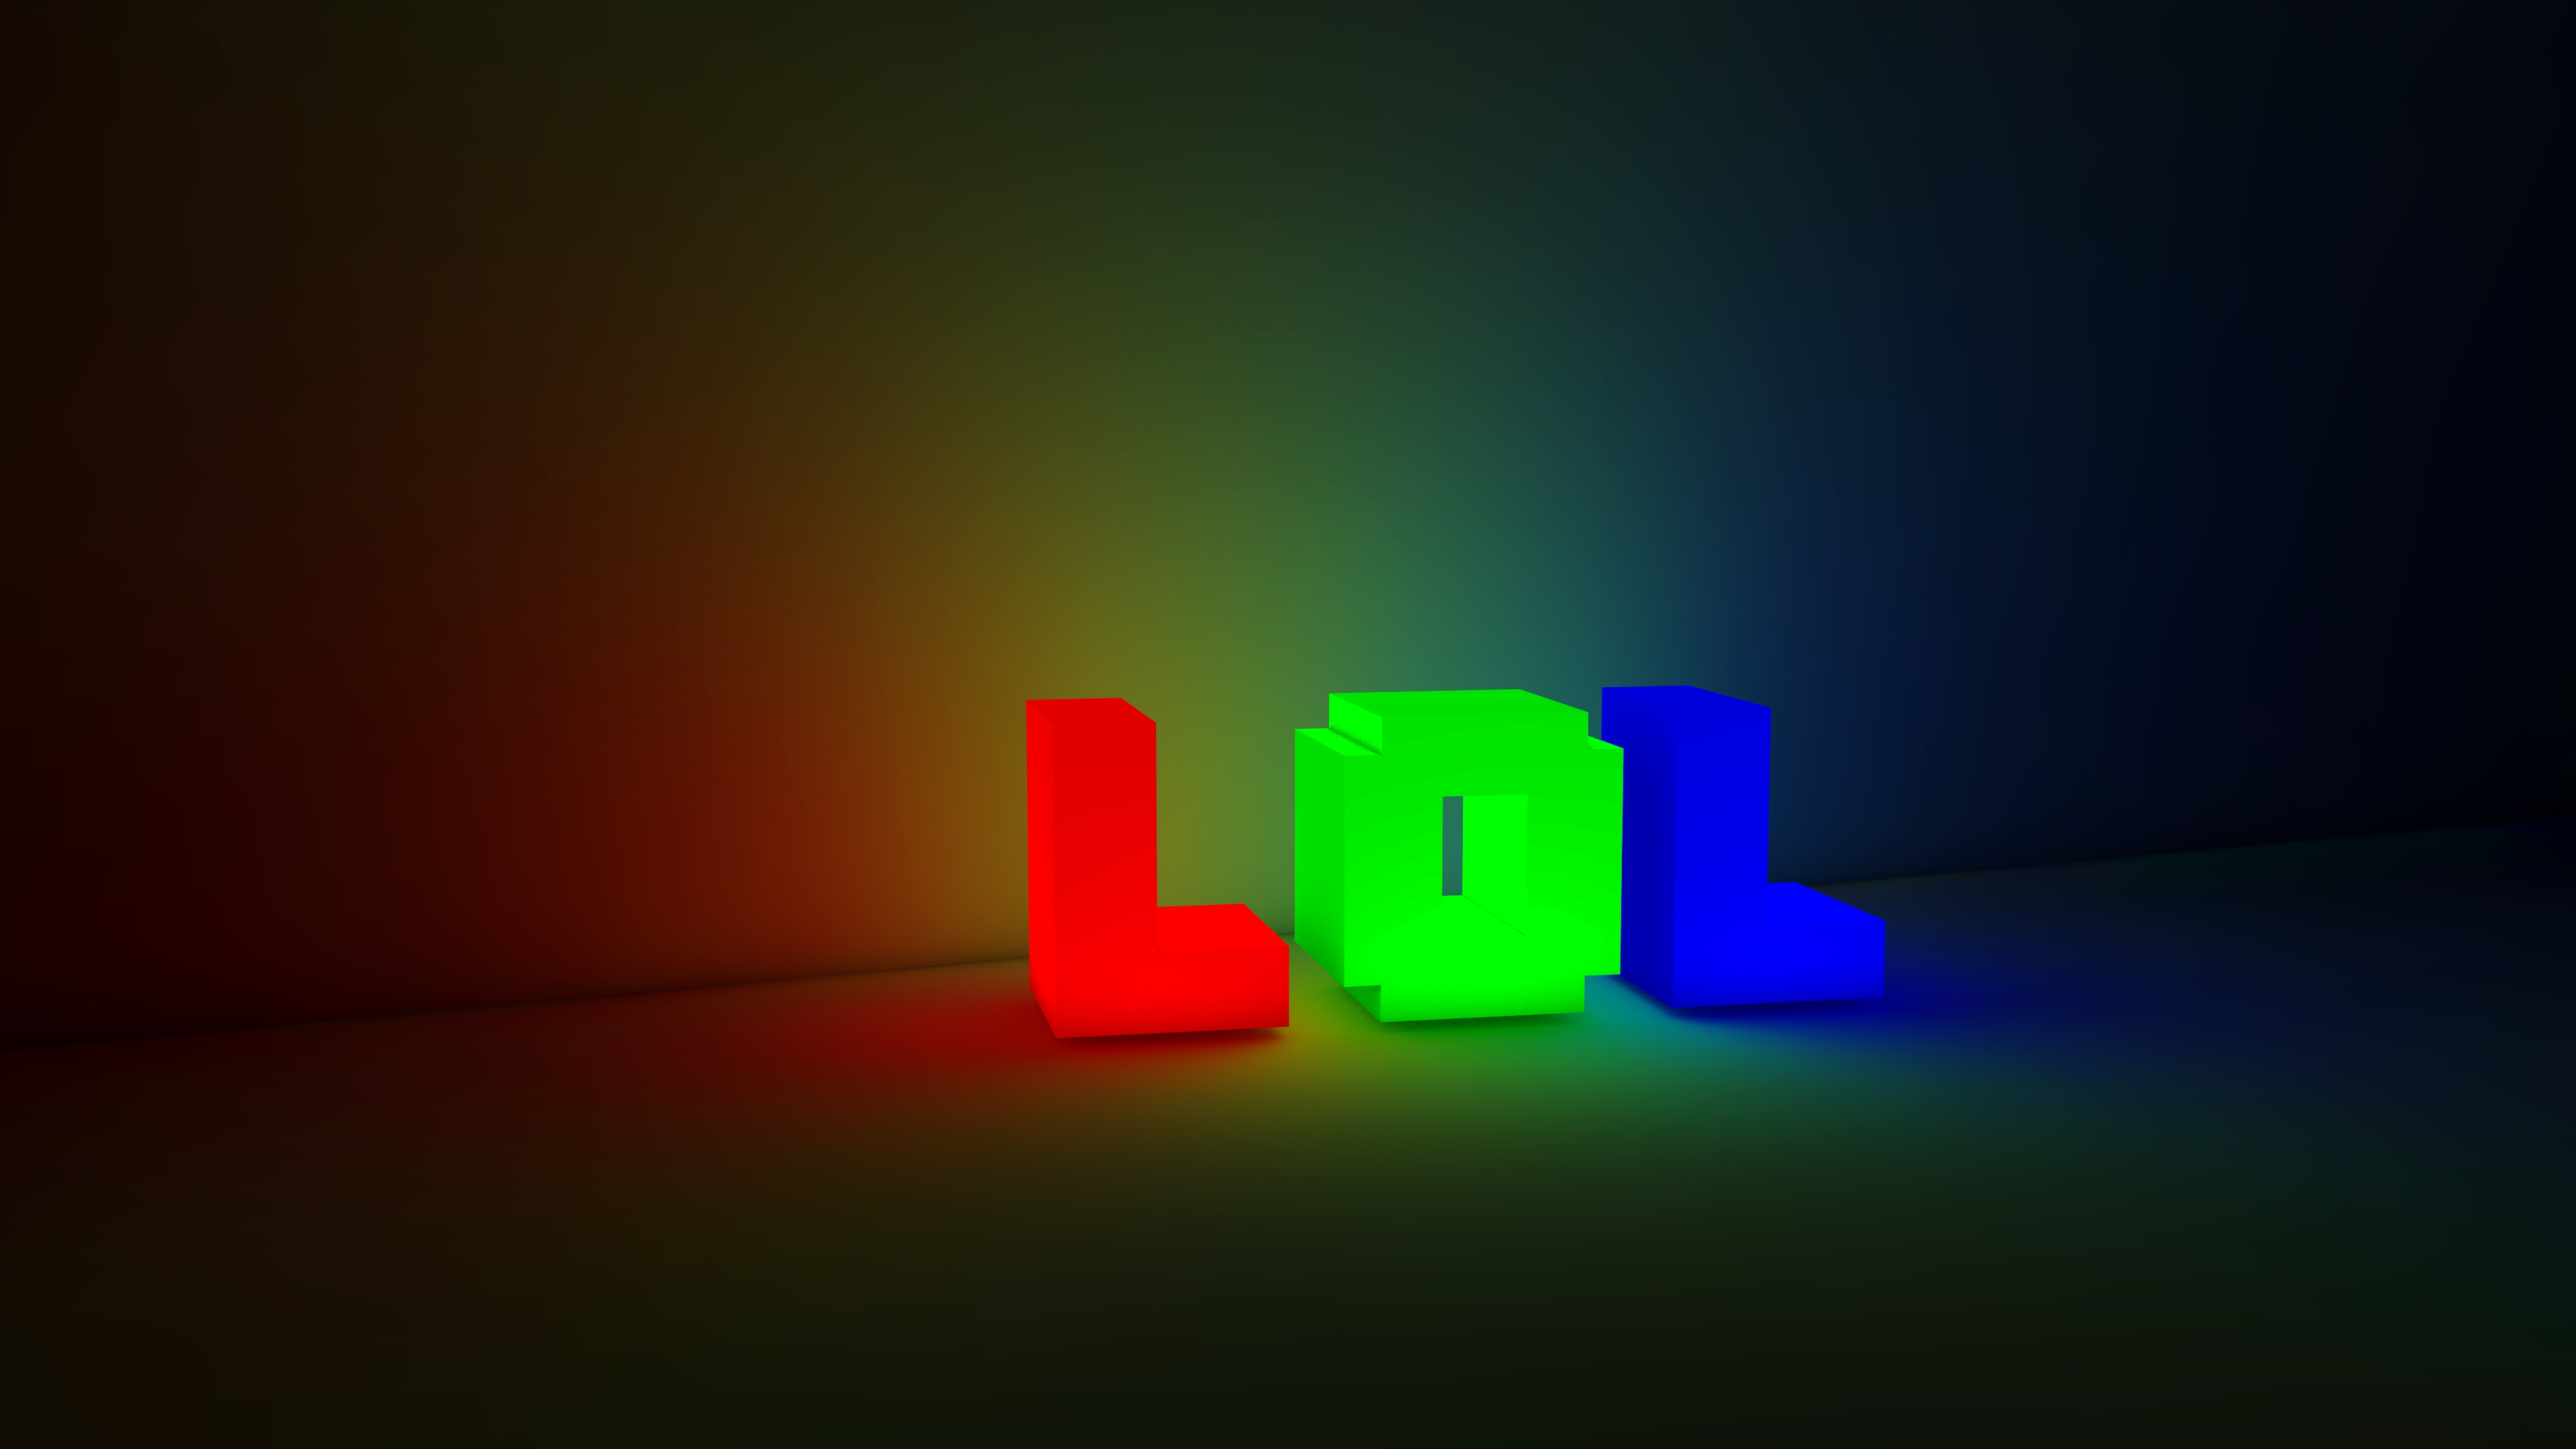 Lol 4k Wallpapers For Your Desktop Or Mobile Screen Free And Easy To Download